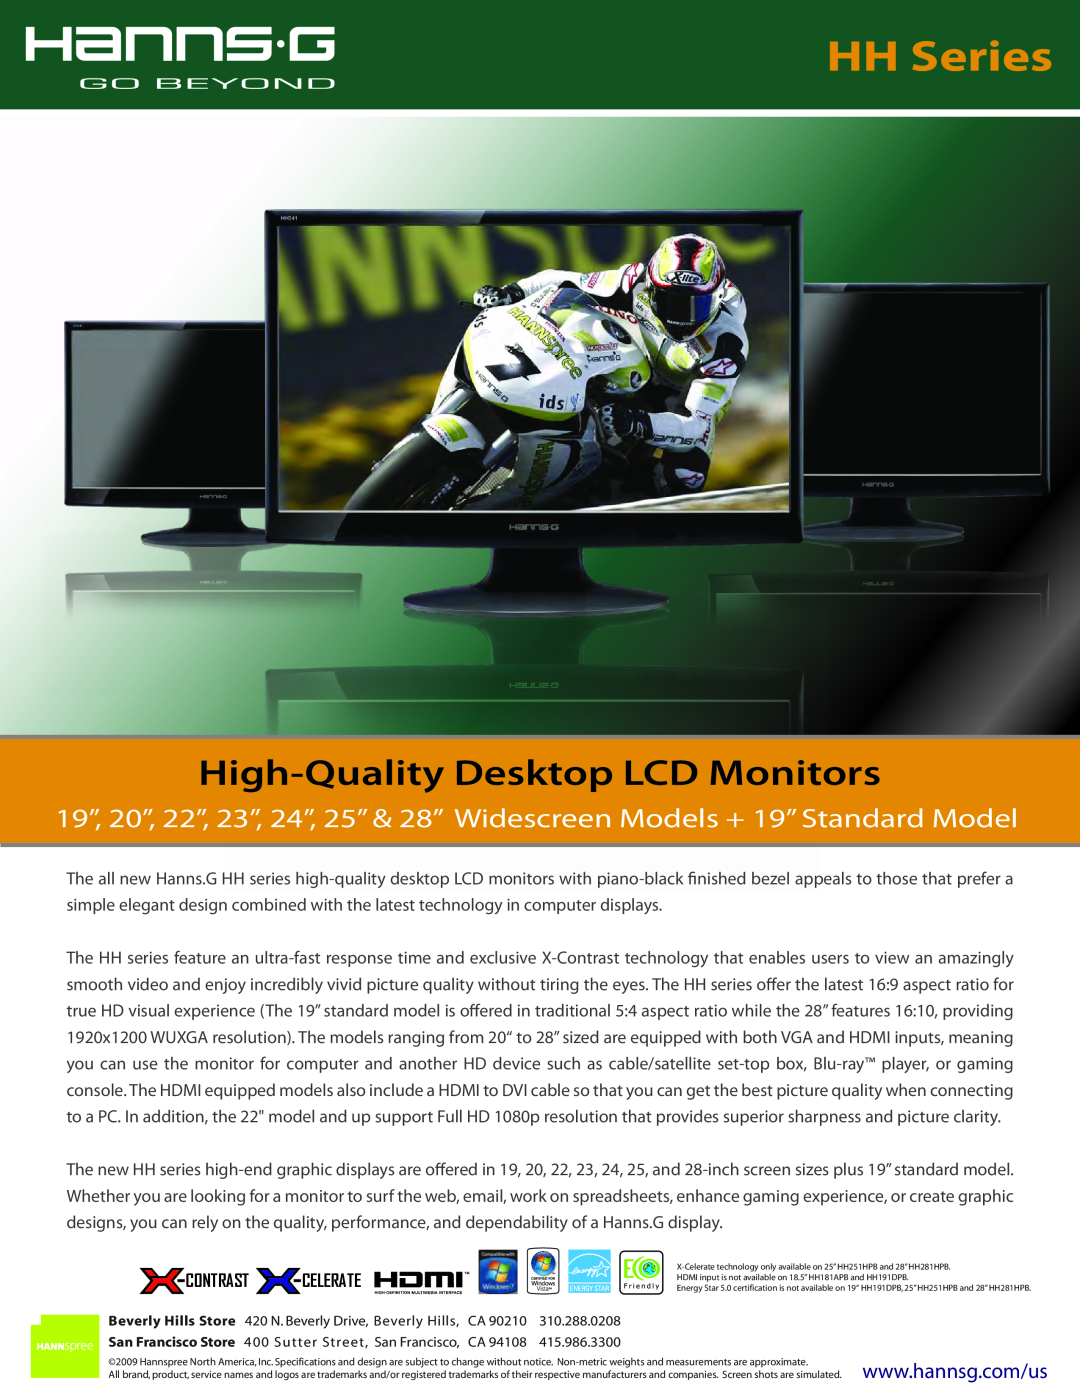 Hanns.G HH191DPB, HH221HPB, HH201HPB specifications Contrast Celerate, HH Series, High-Quality Desktop LCD Monitors 